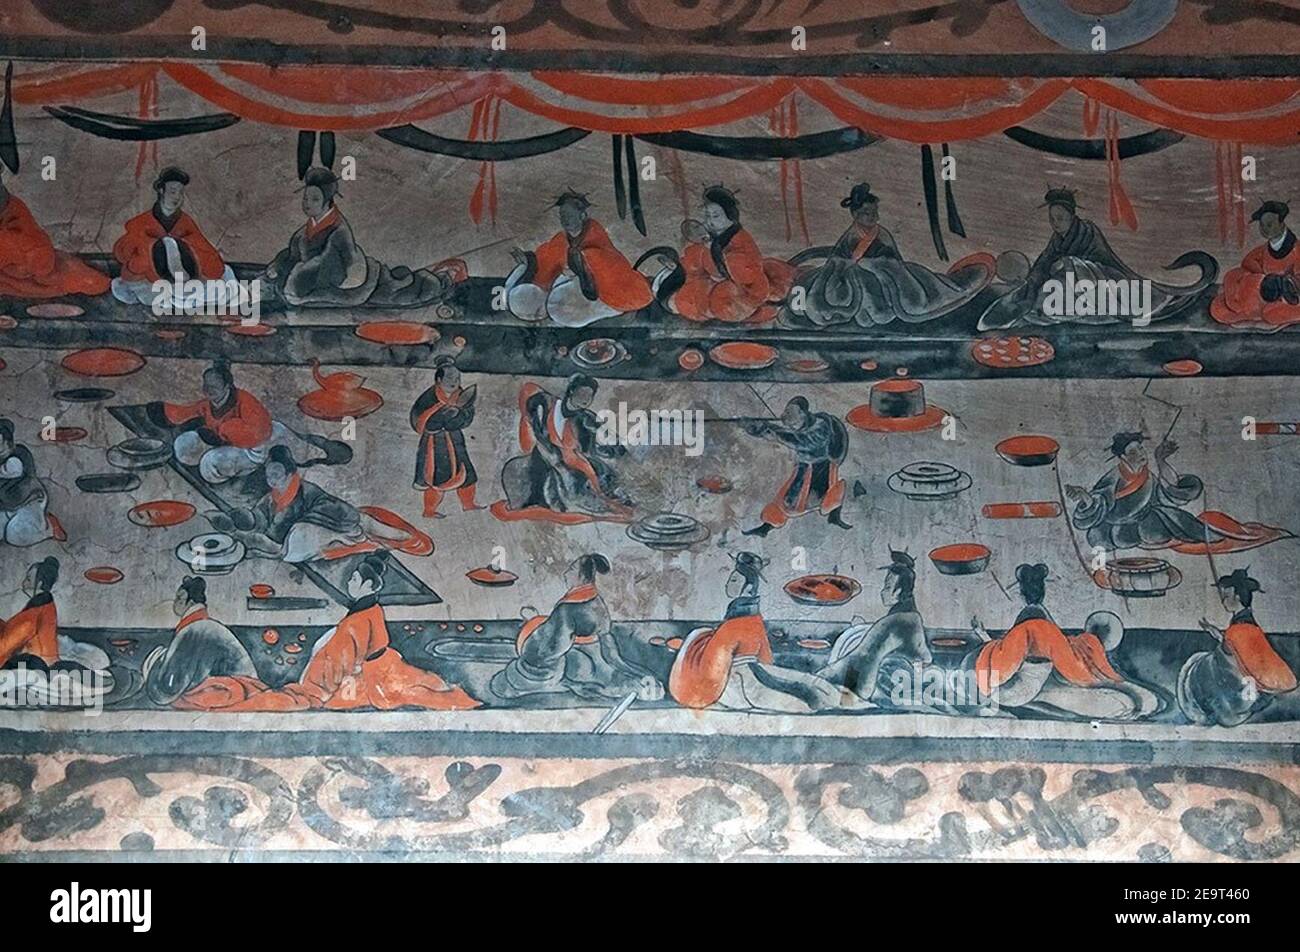 Mural Painting of a Banquet Scene from the Han Dynasty Tomb of Ta-hu-t'ing. Stock Photo